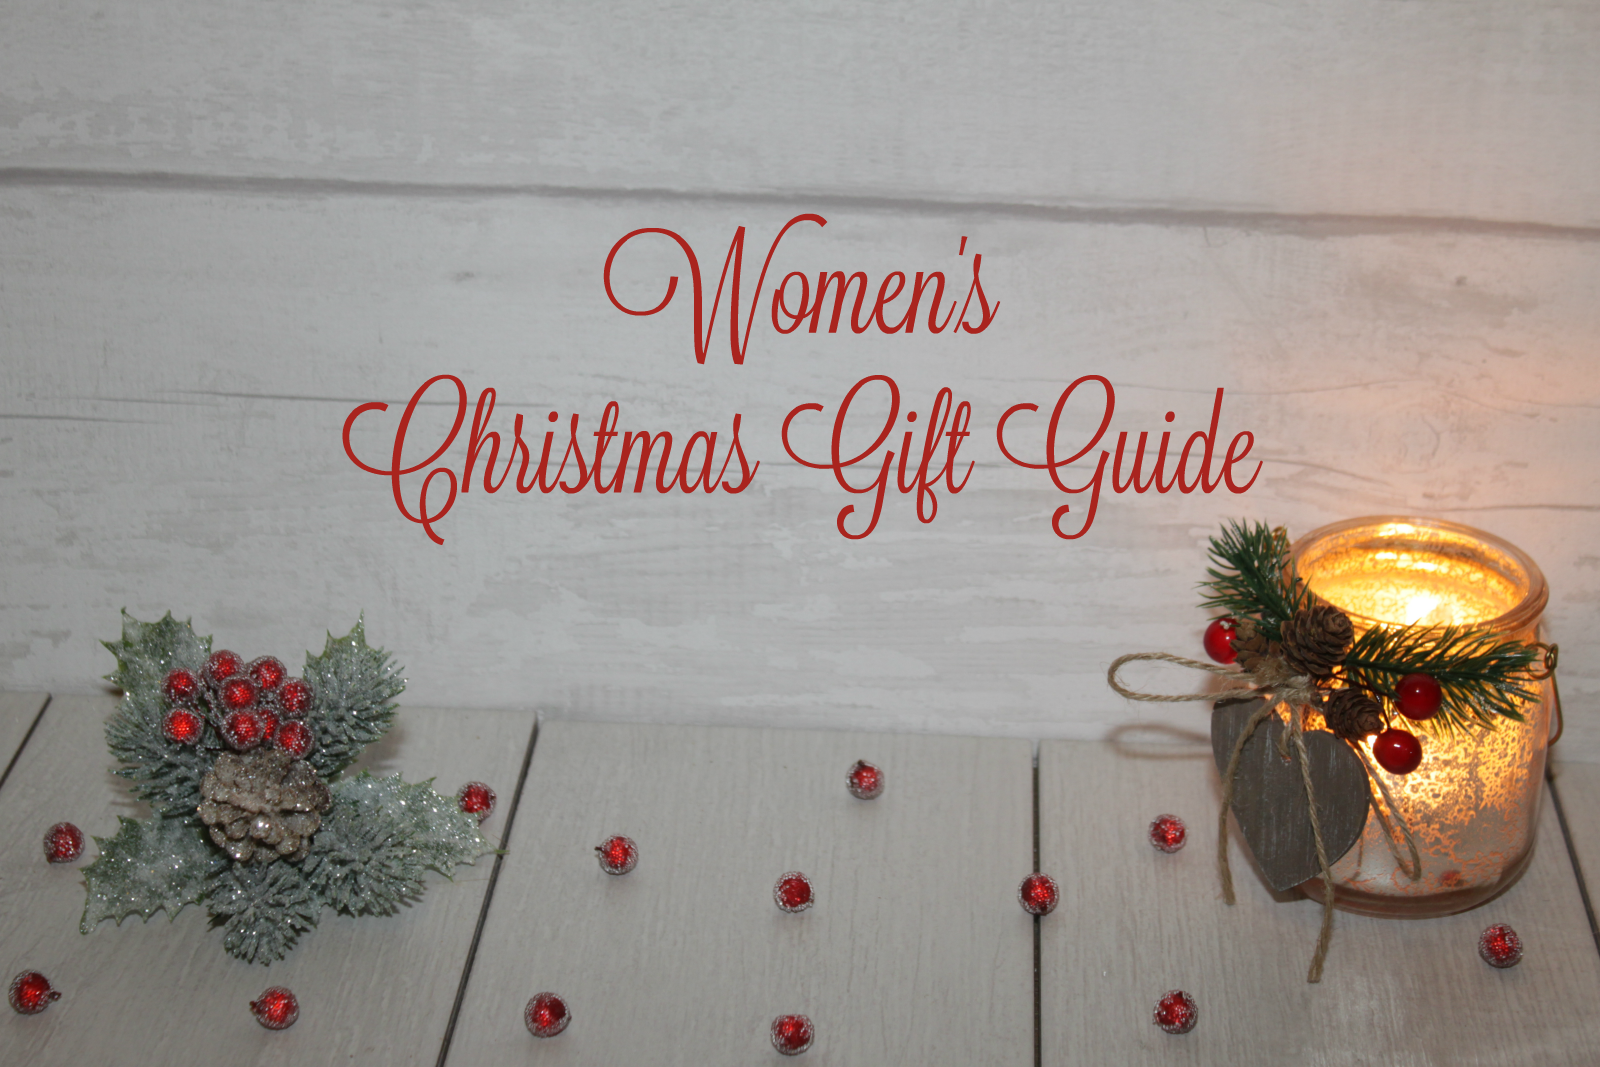 2018 Christmas Gift Guide - For Her.